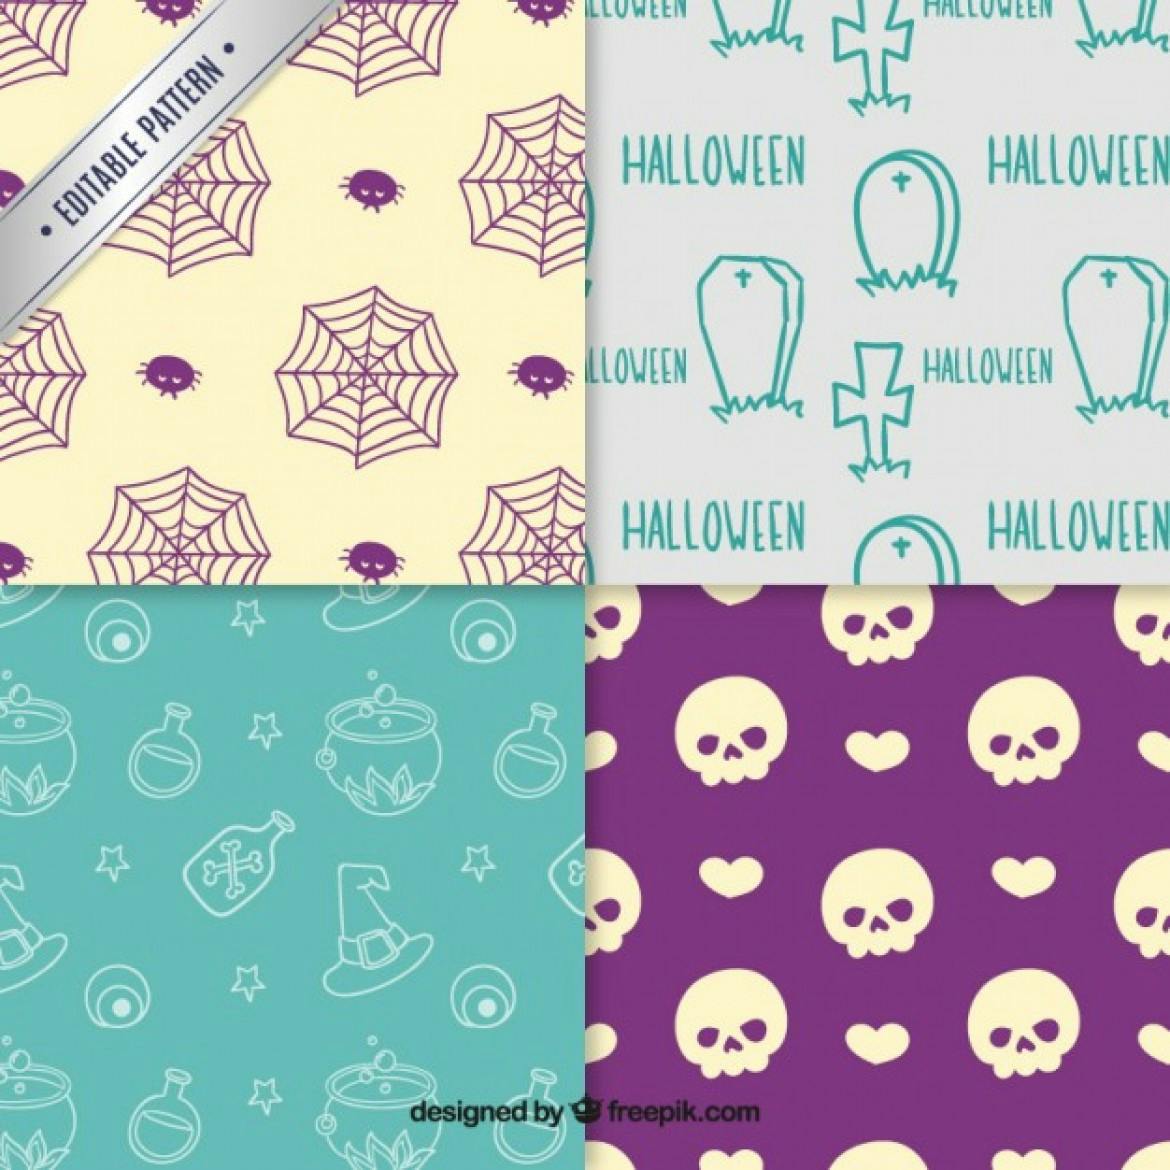 Halloween pattern collection